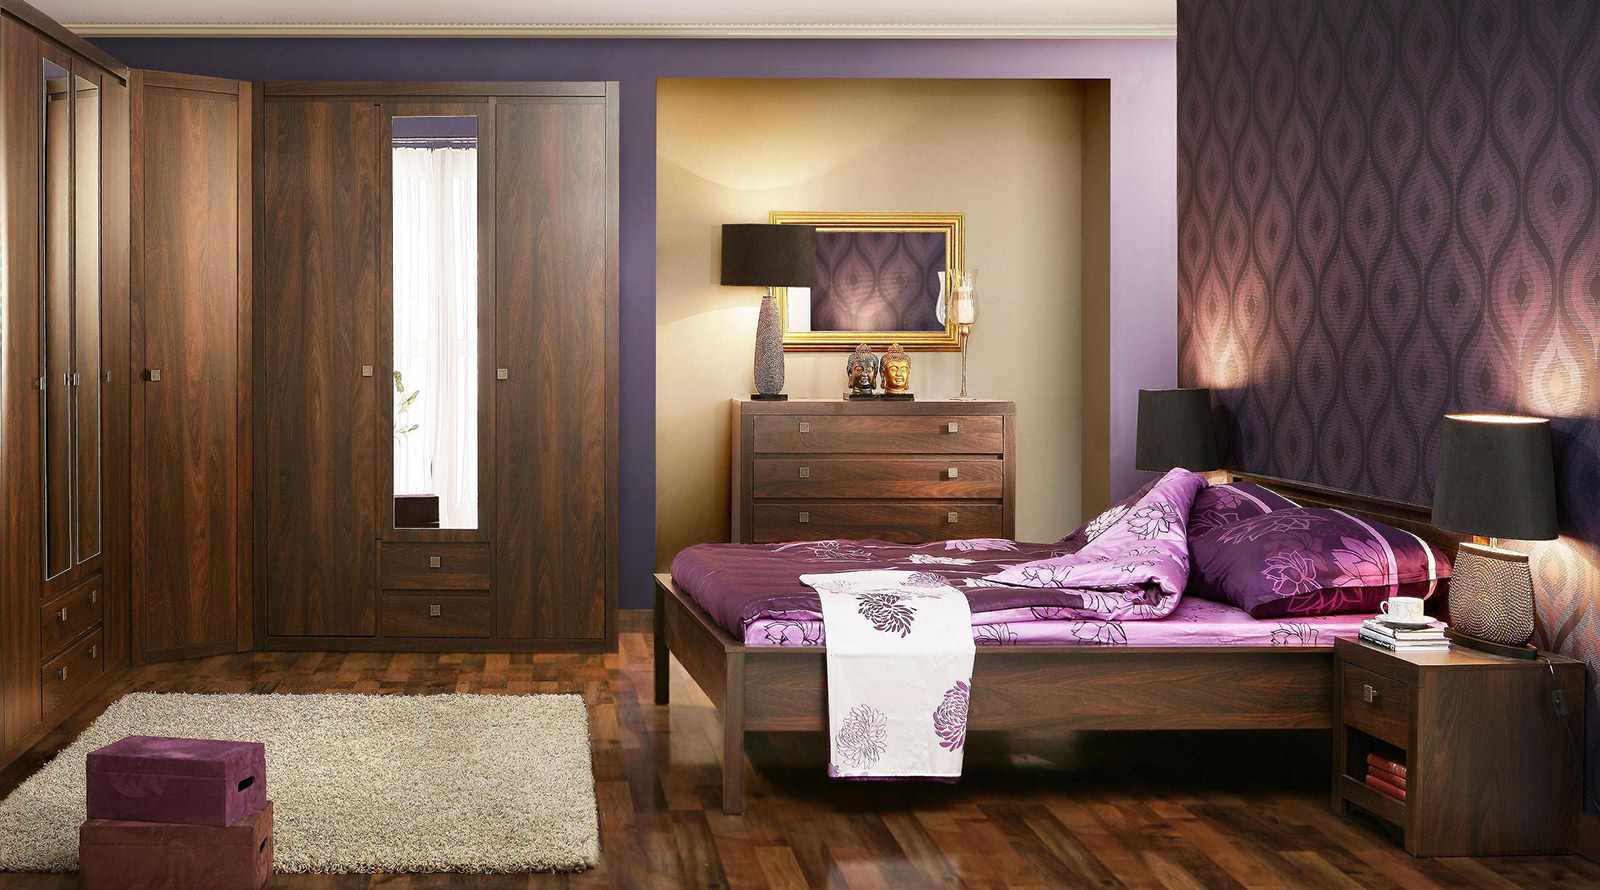 an example of a beautiful bedroom interior